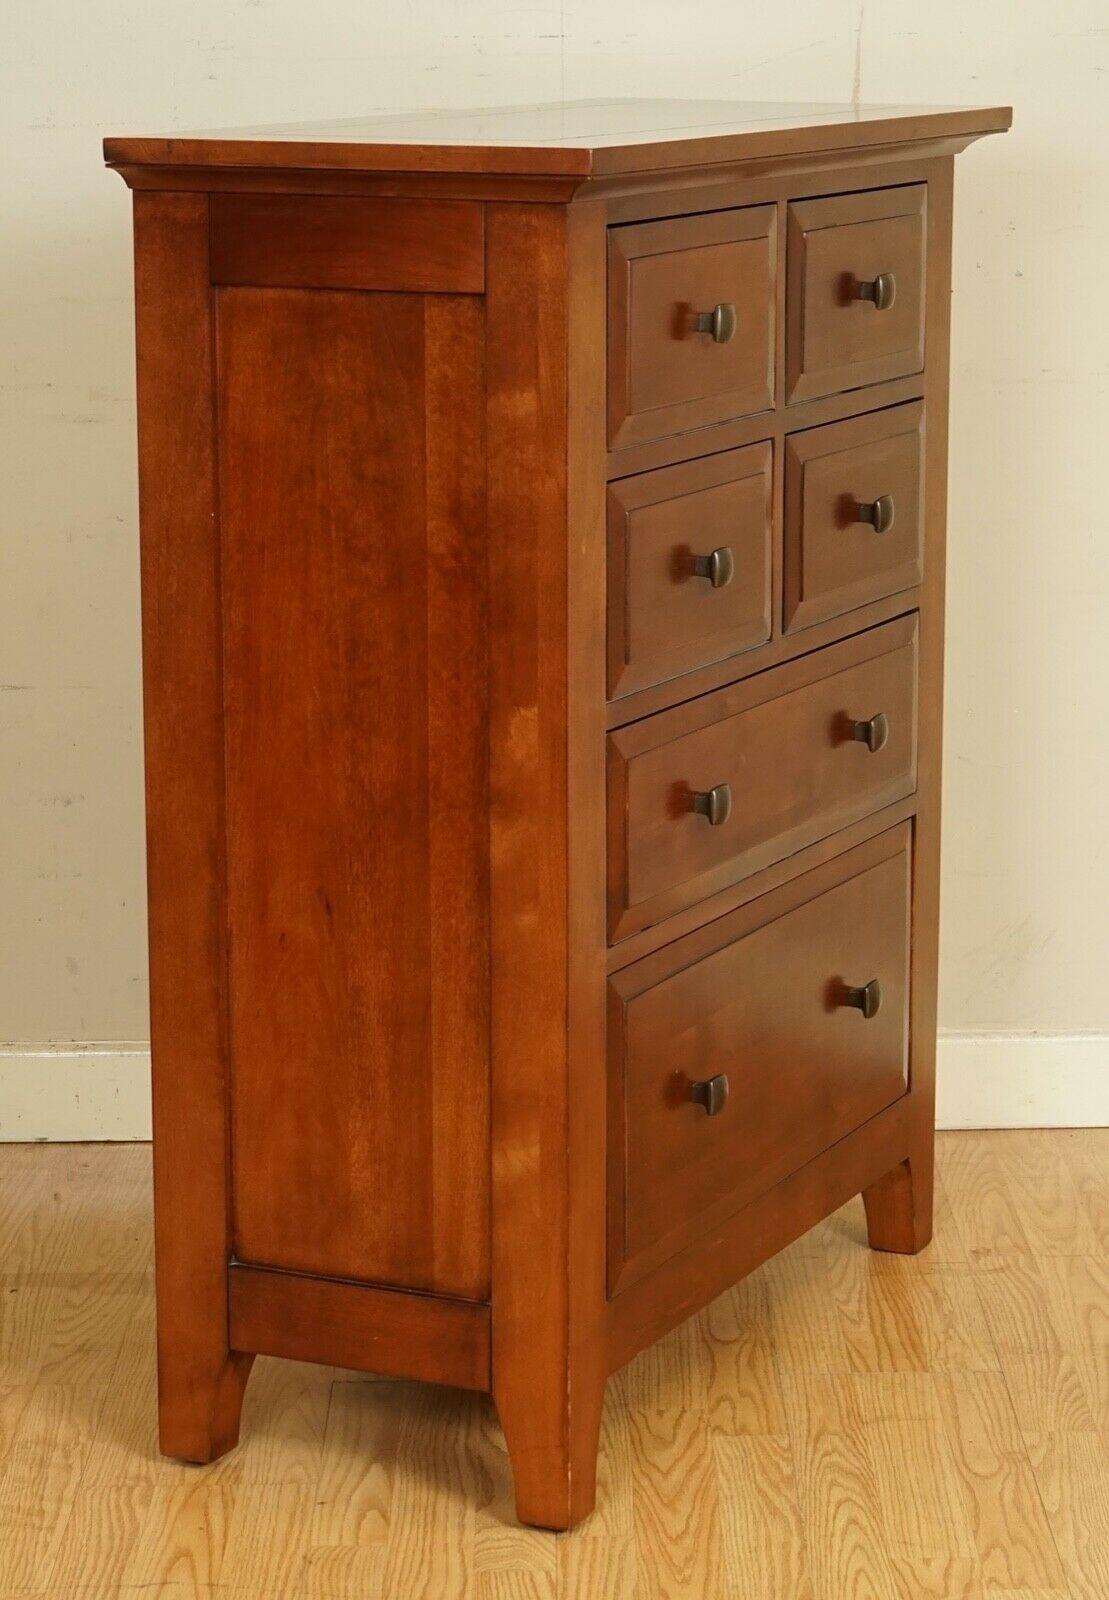 Hardwood Lovely Willis & Gambier Solid Tall Boy Chest of Drawers Part of Suite